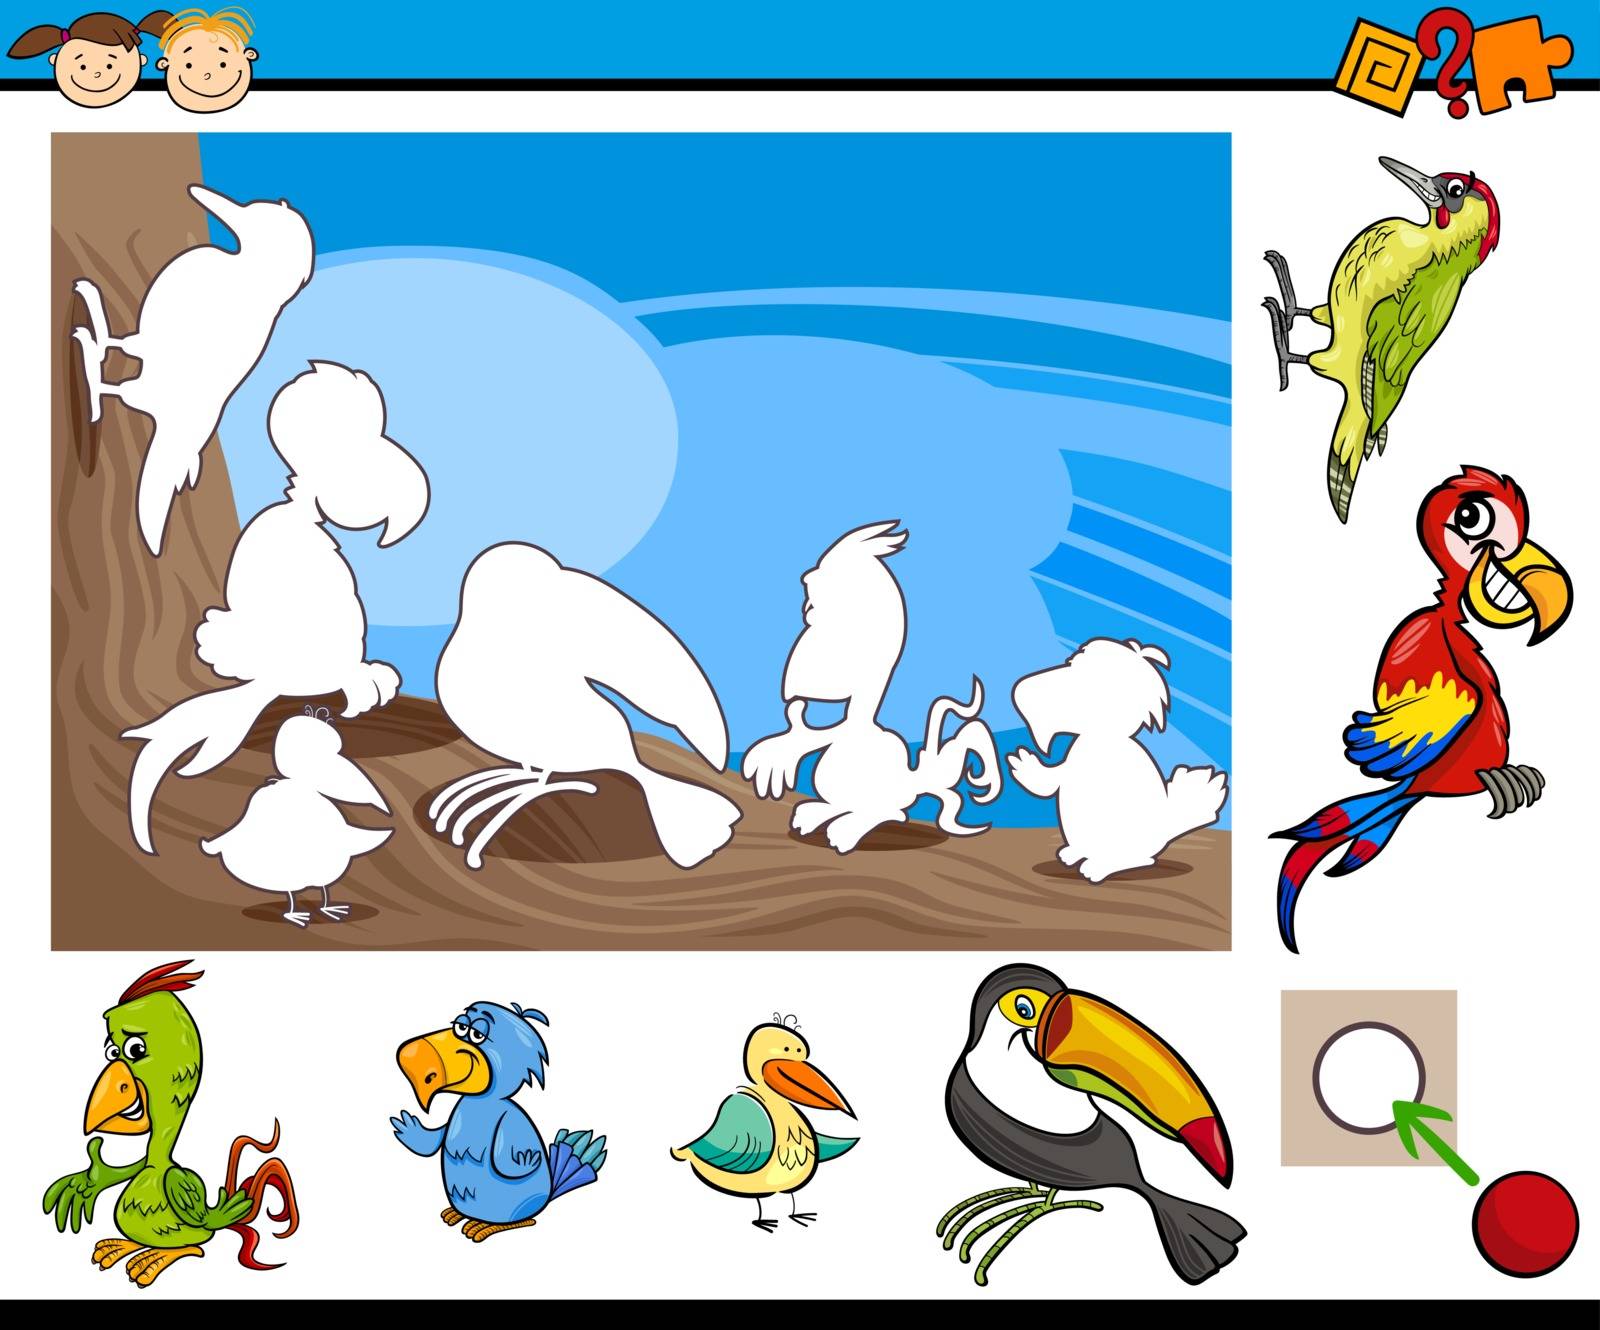 Cartoon Illustration of Educational Game for Preschool Children with Birds Animal Characters